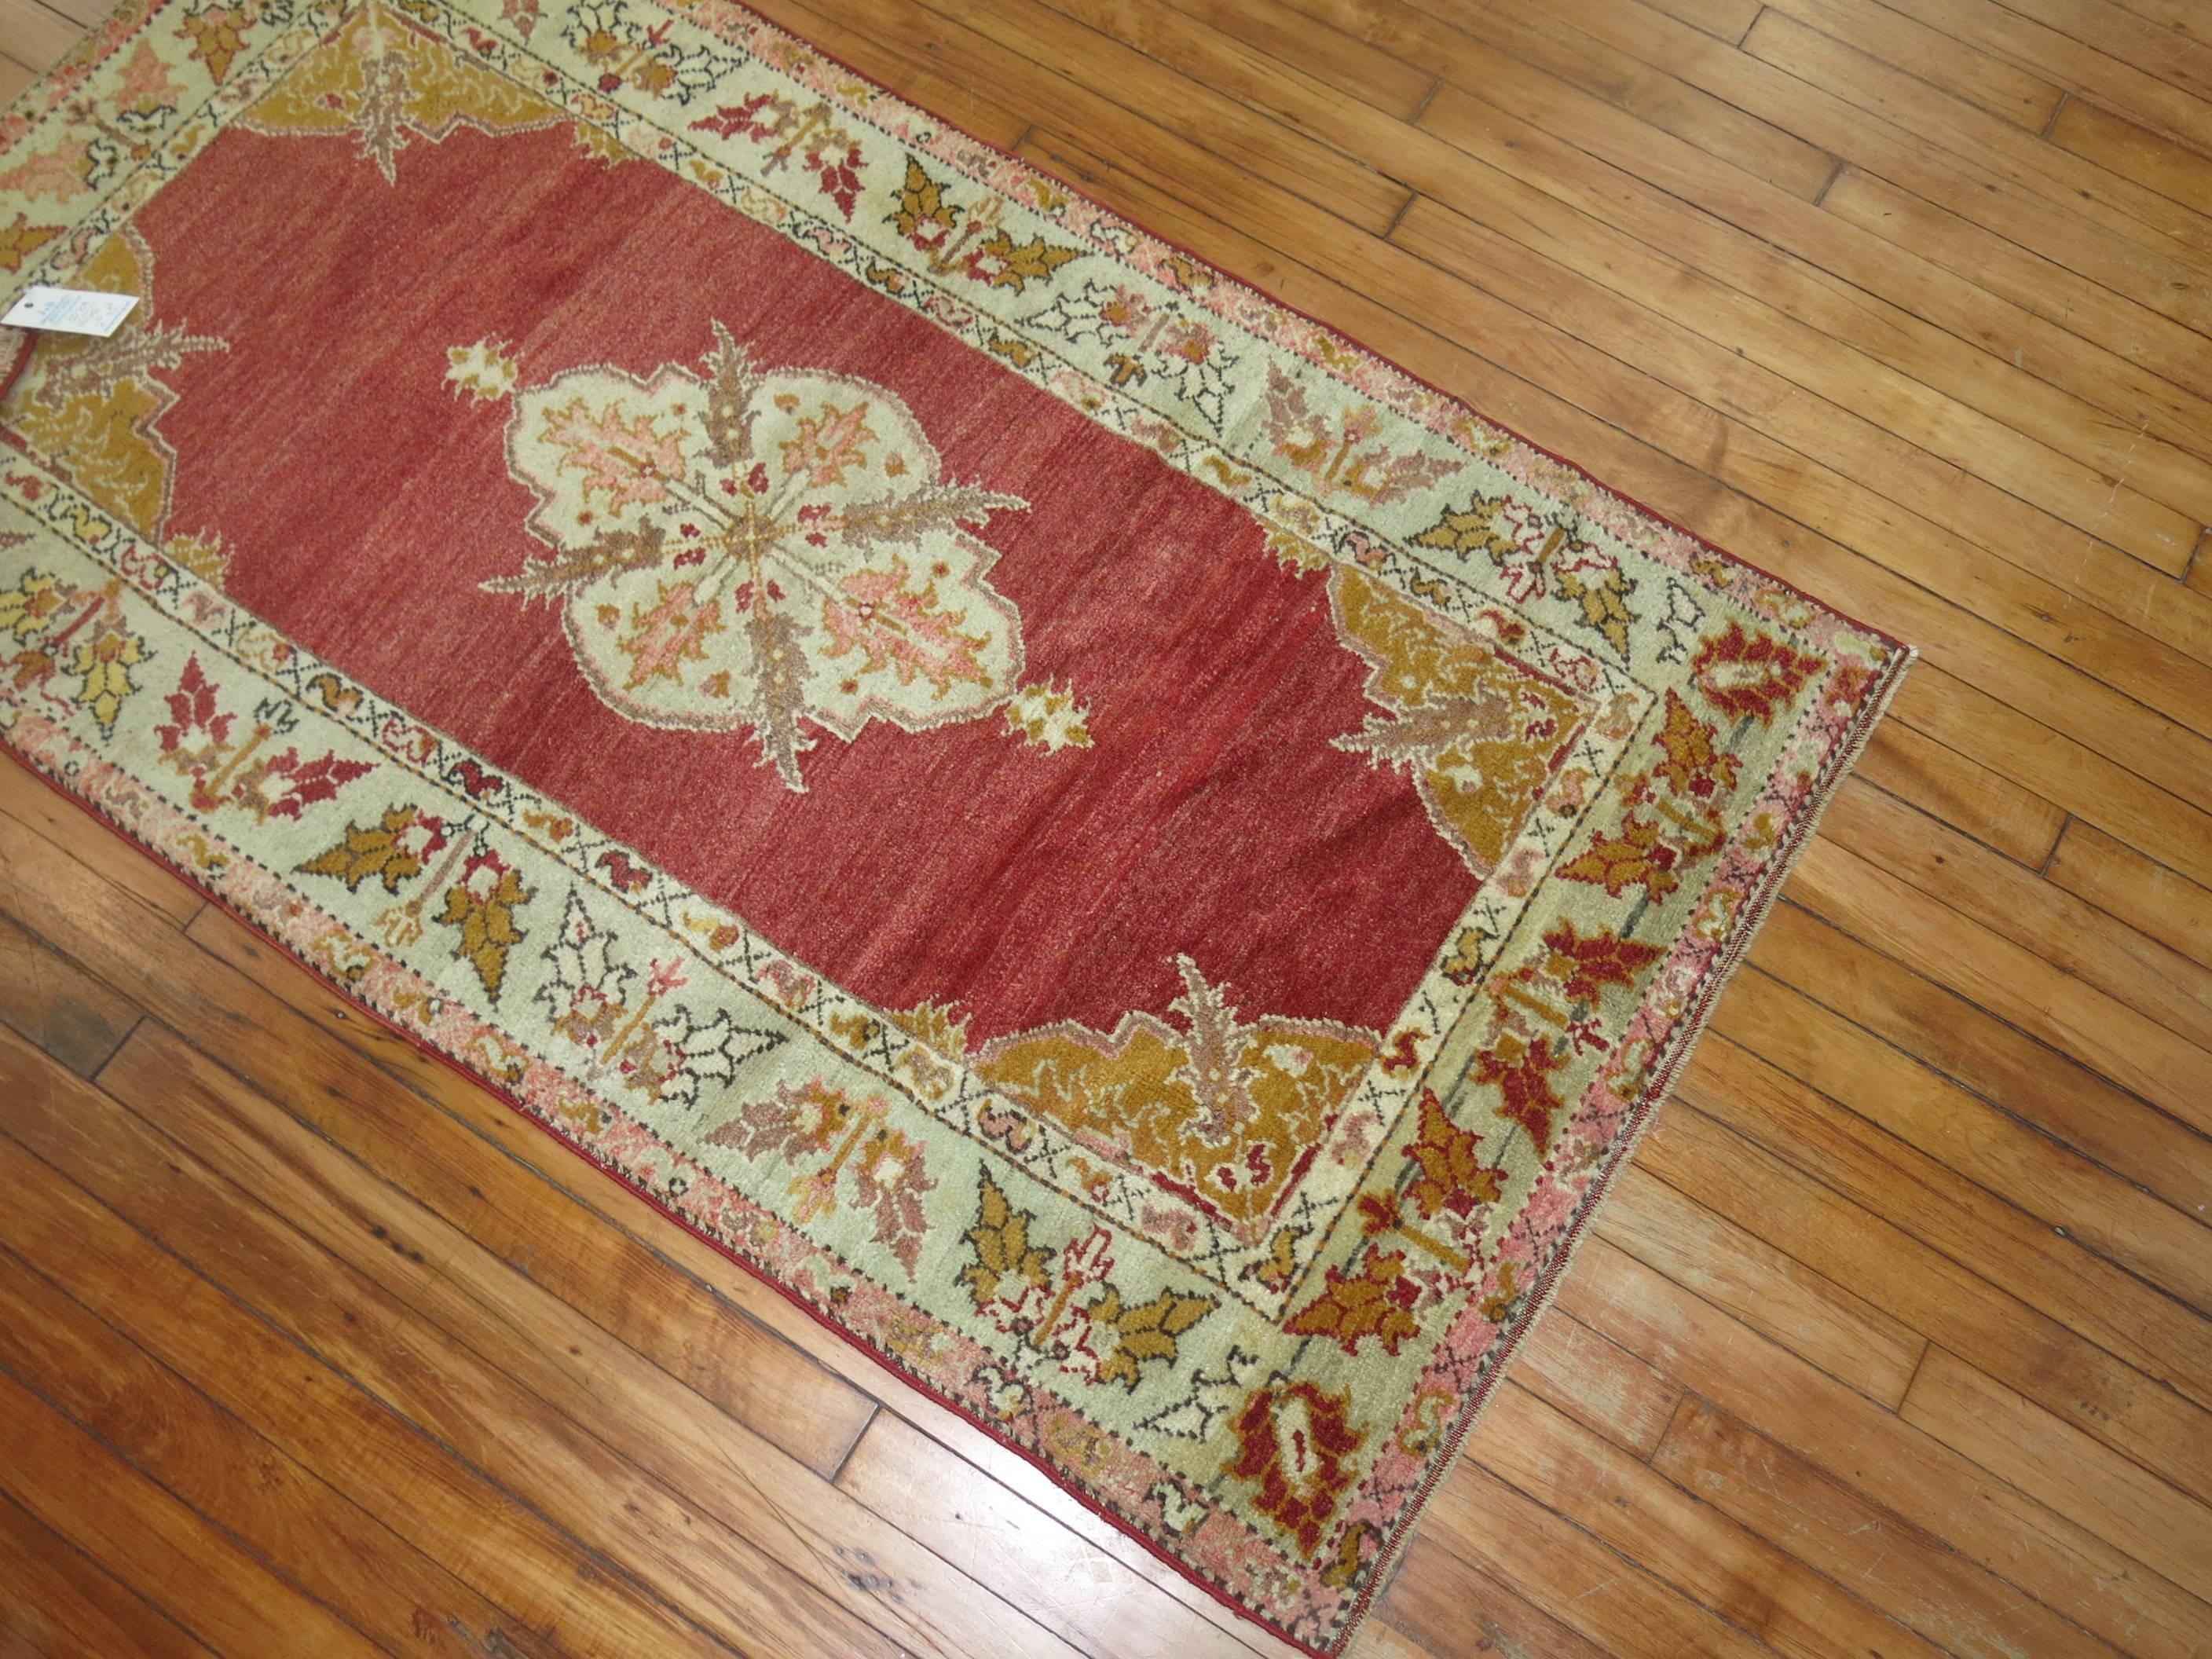 Fine quality early 20th century Turkish rug with a spacious red open field medallion design.